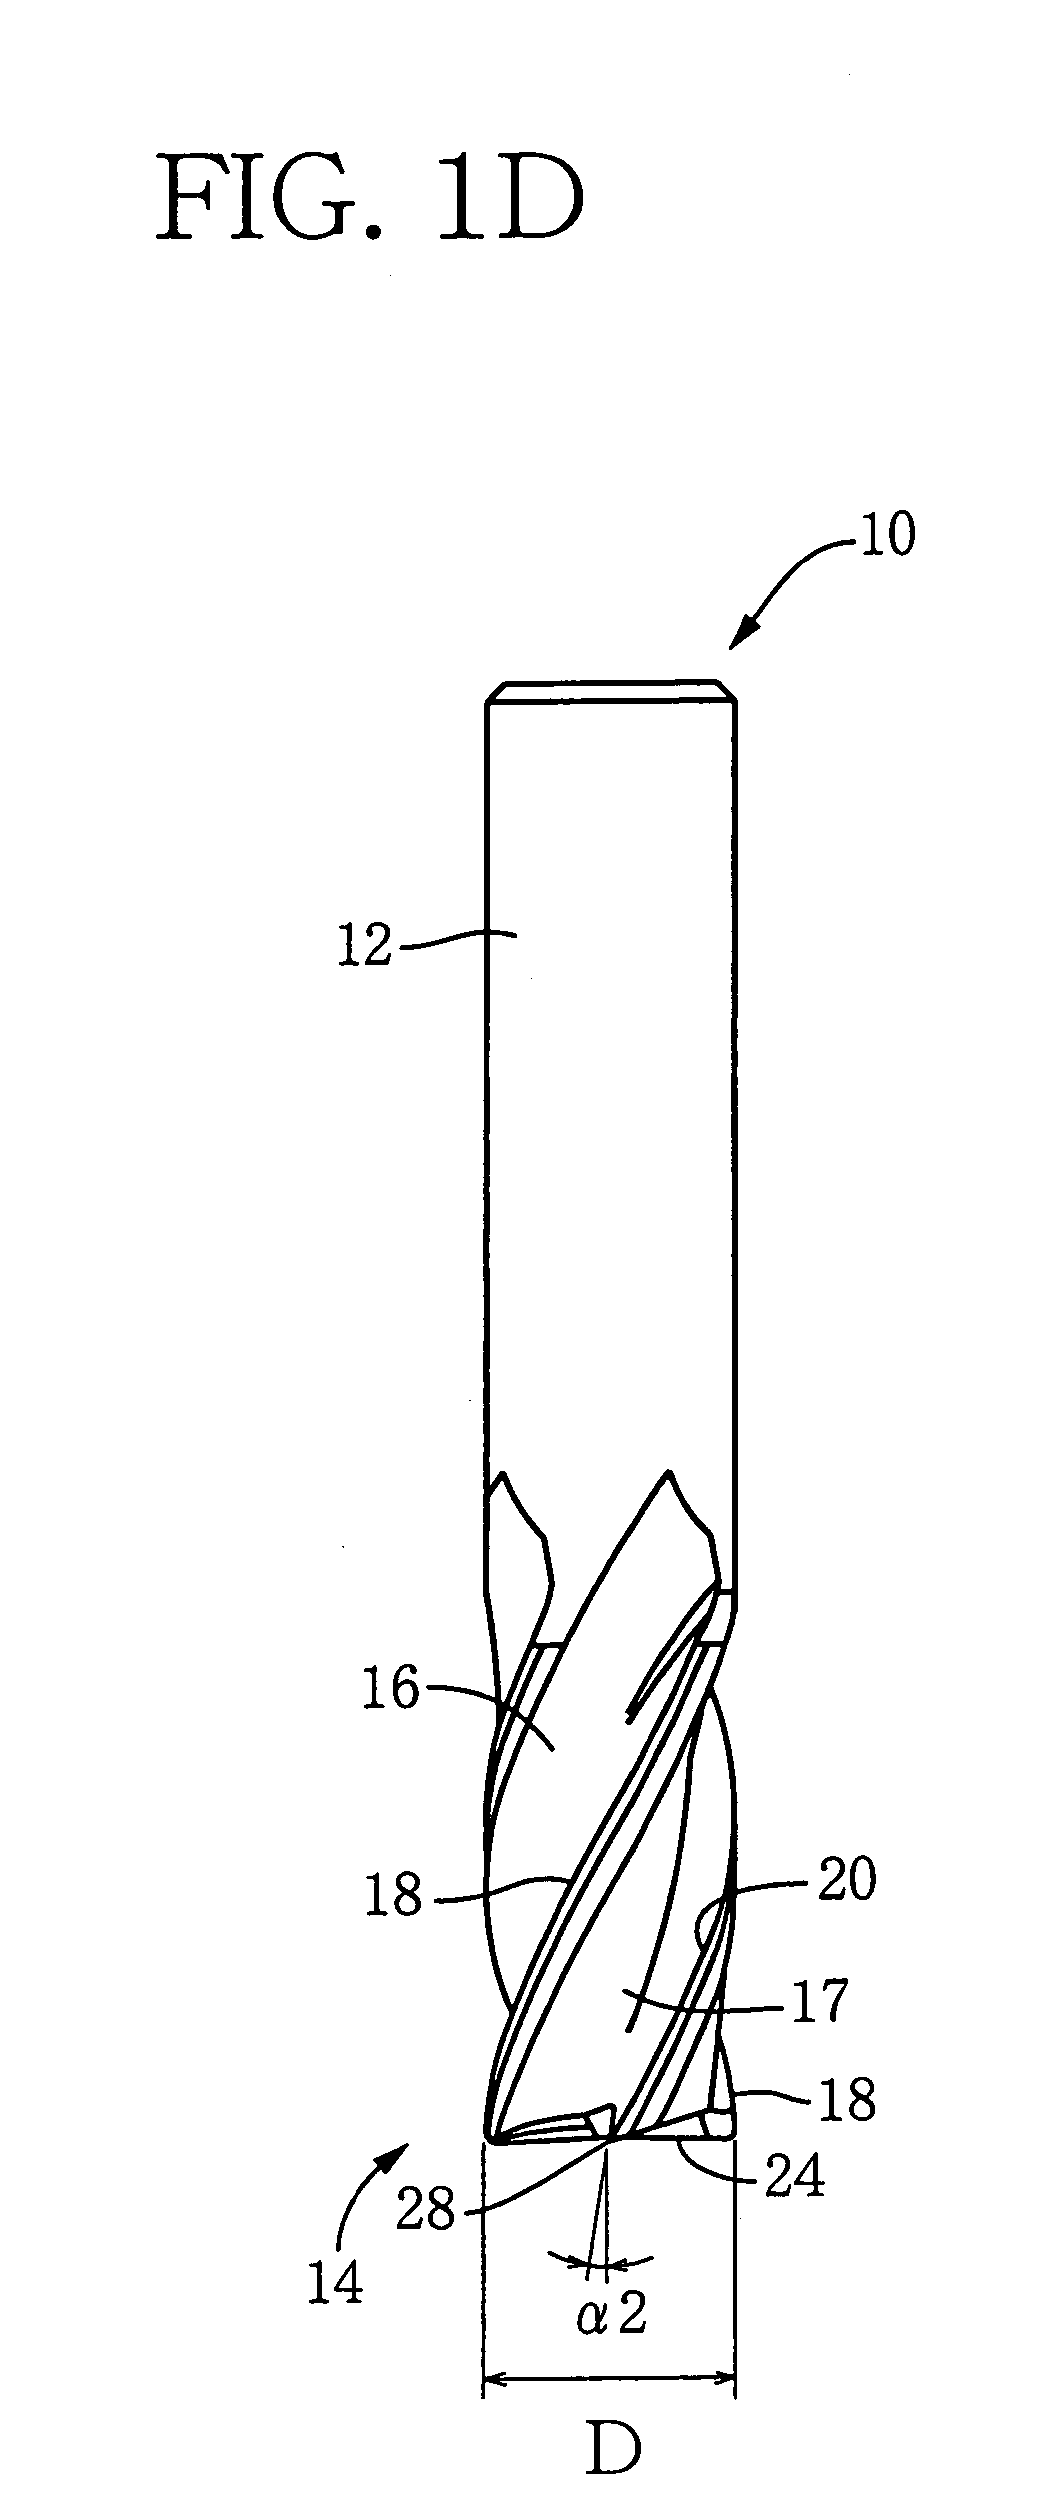 End mill having different axial rake angles and different radial rake angles